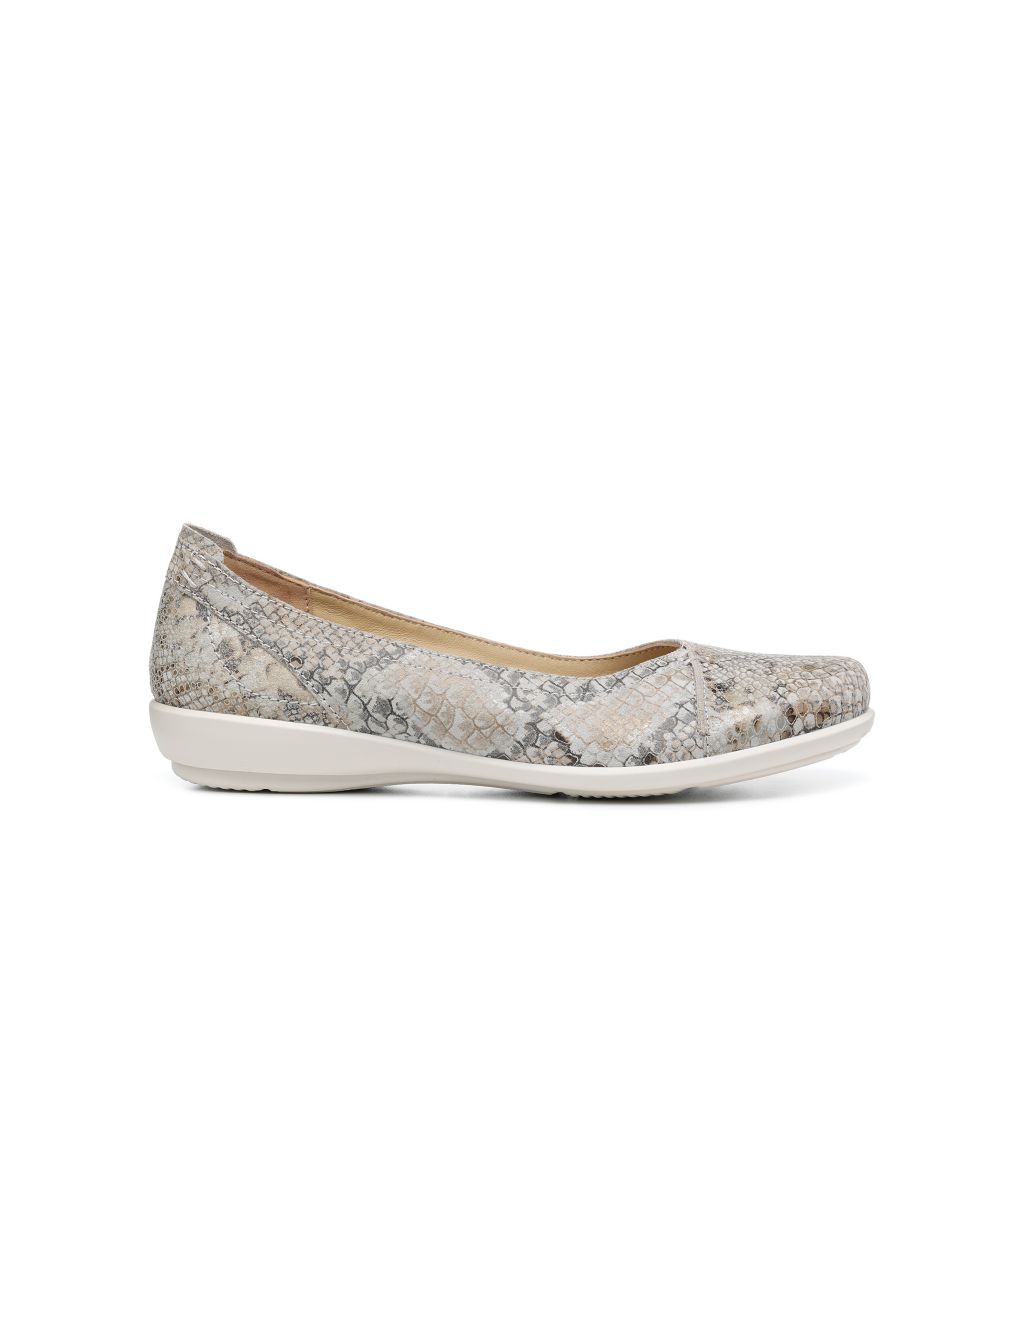 Robyn Leather Animal Print Ballet Pumps image 1